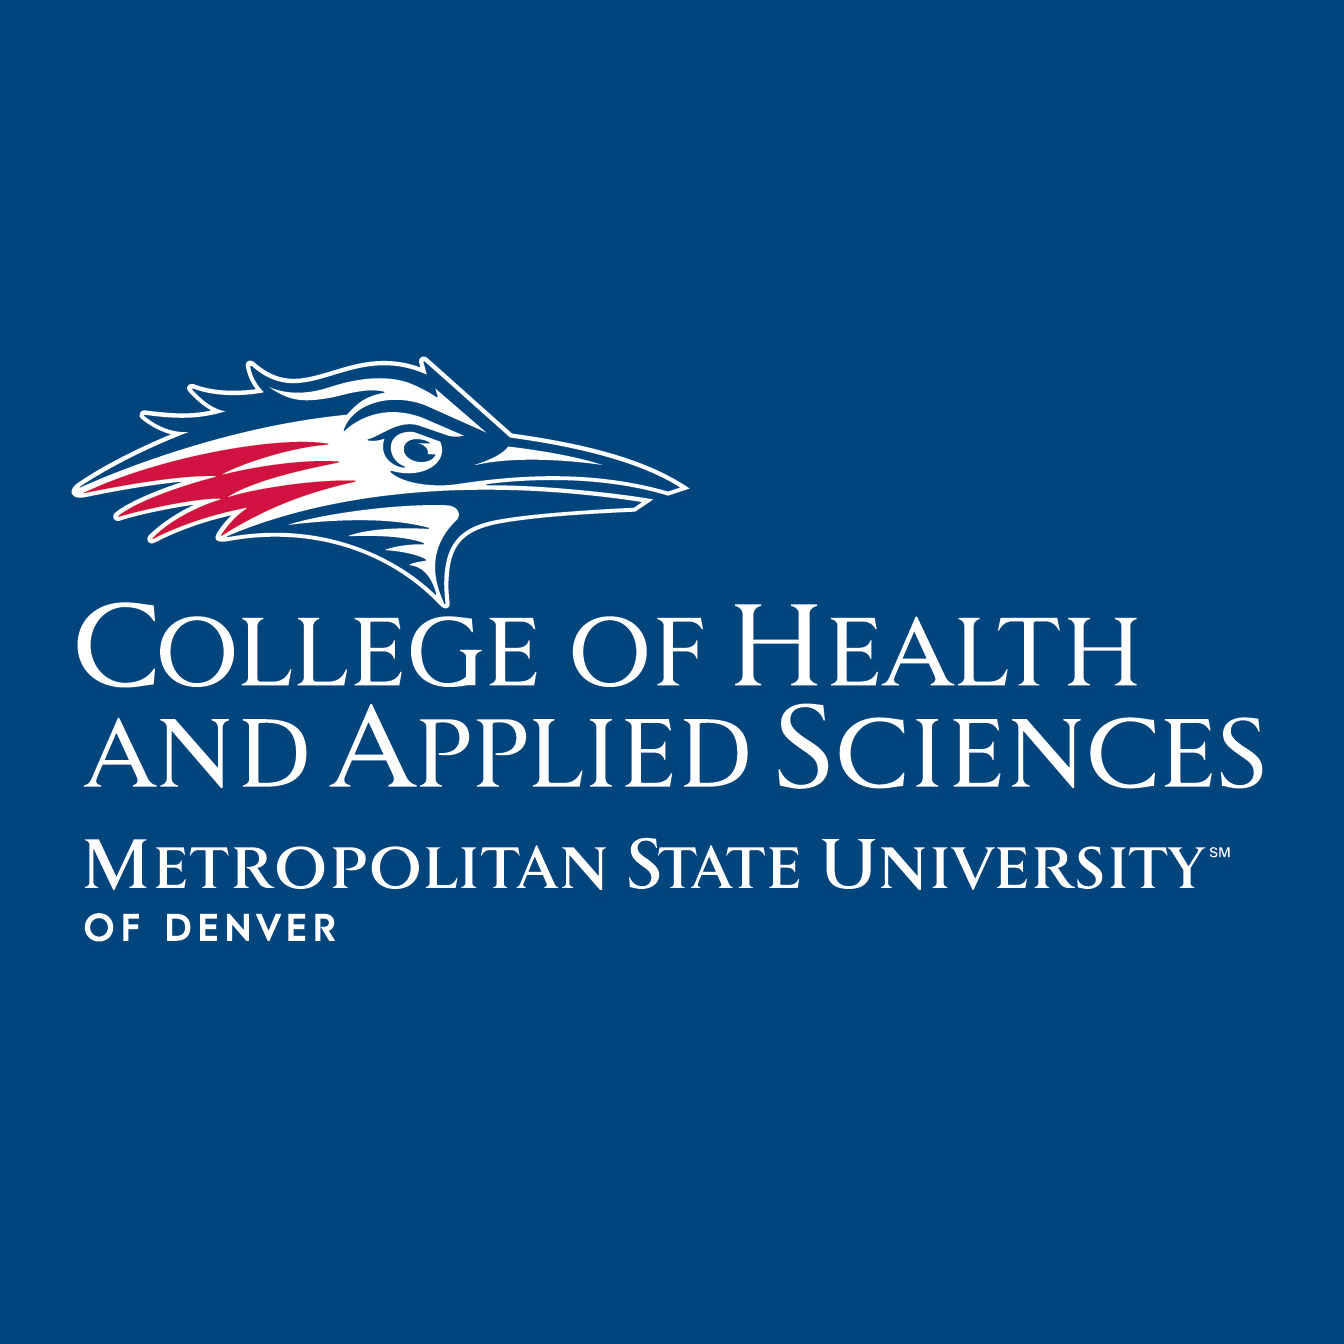 College of Health and Applied Sciences Metropolitan State University of Denver